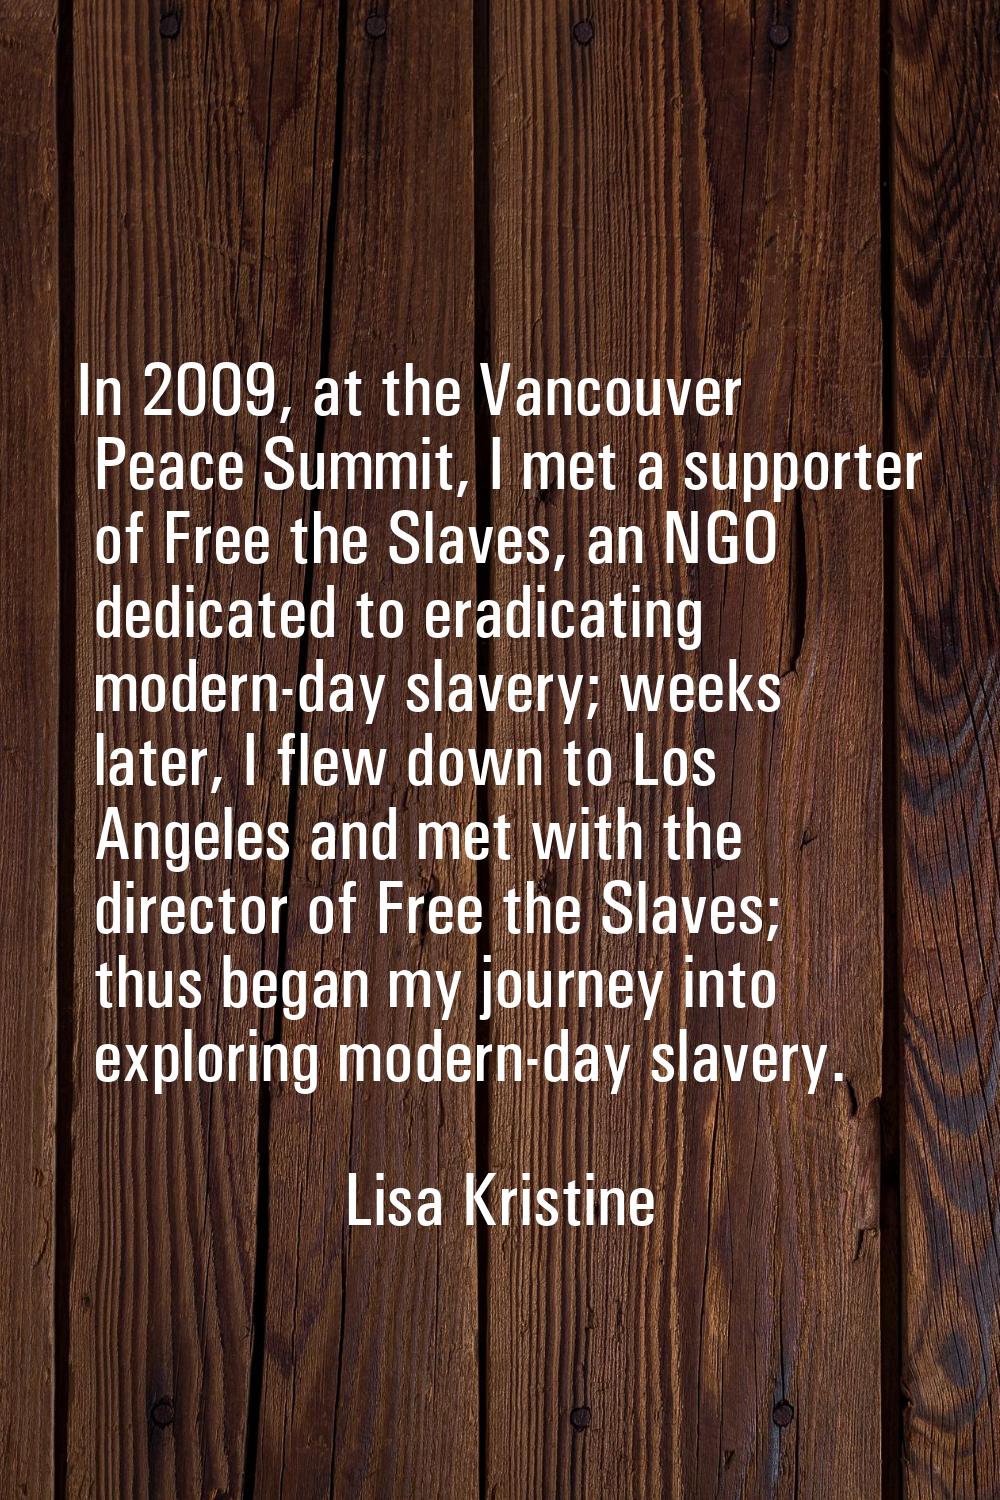 In 2009, at the Vancouver Peace Summit, I met a supporter of Free the Slaves, an NGO dedicated to e